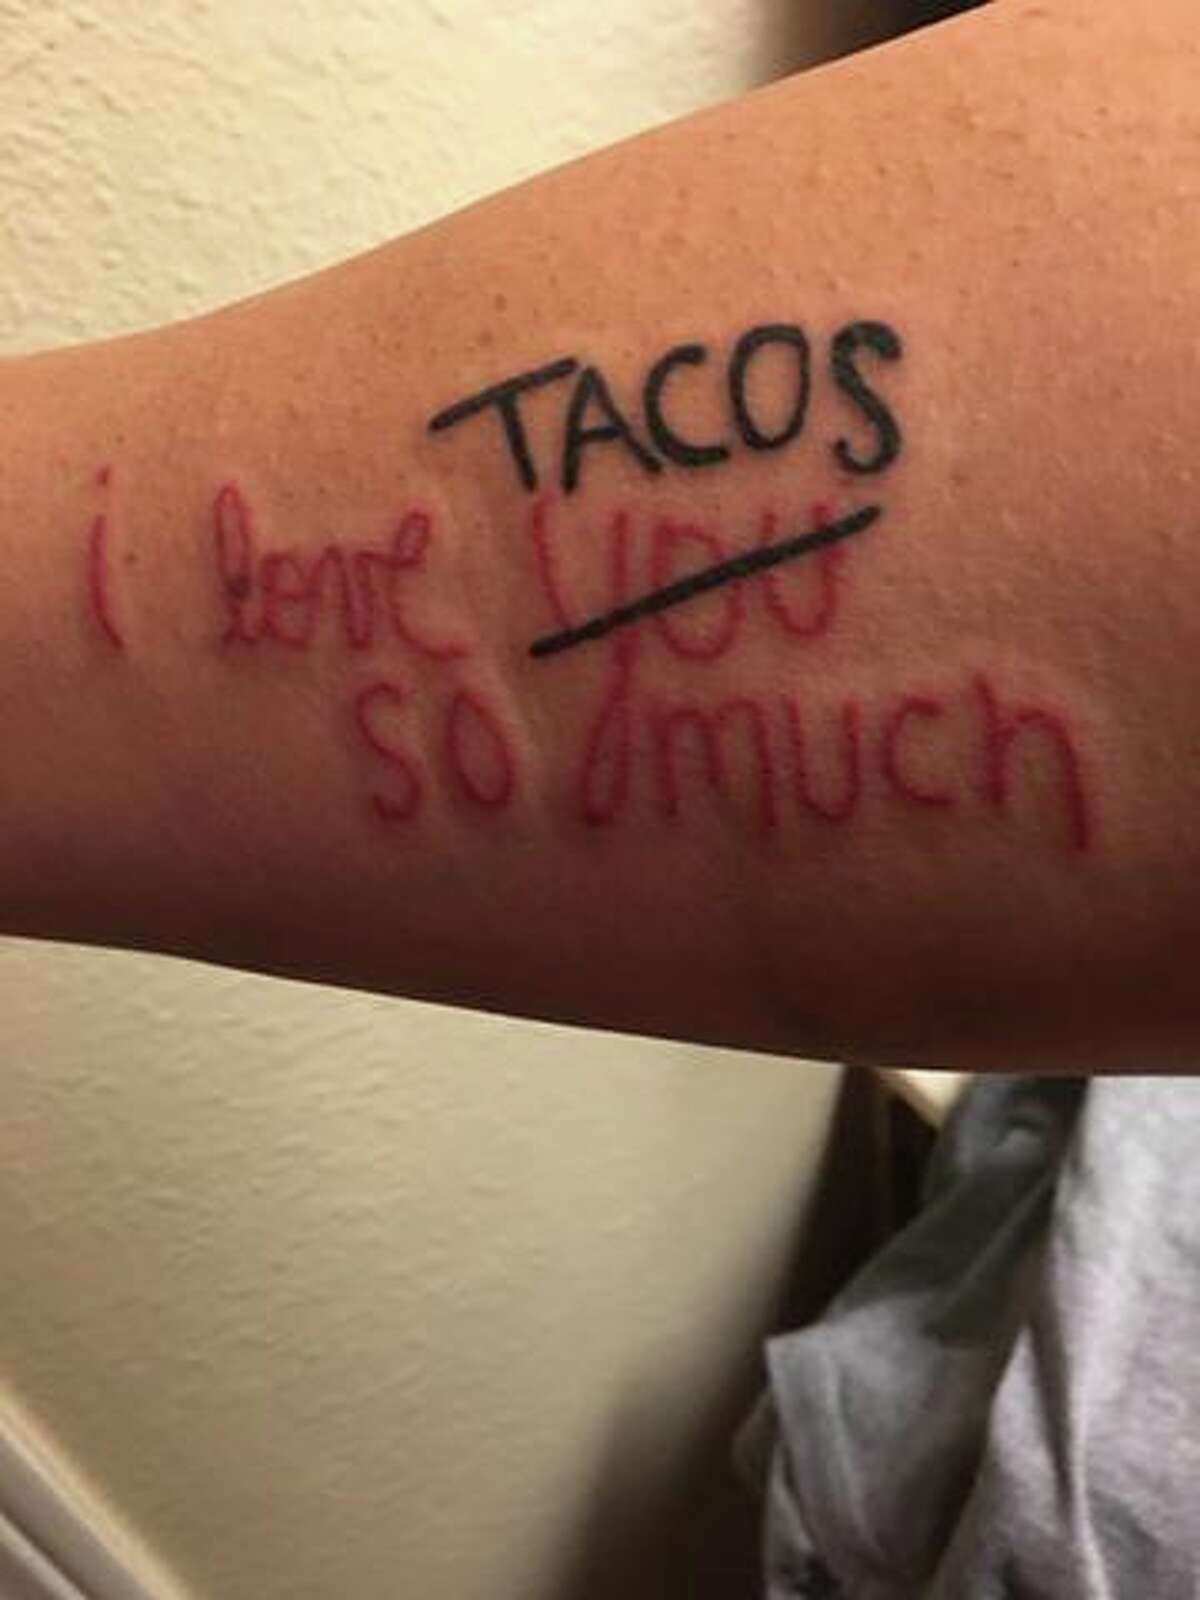 Cesar Aldape, a 46-year-old San Antonio native, got a tattoo on his forearm of the "I love tacos so much" wall at Old Glory Tattoo, 12510 West Ave., on Tuesday, Oct. 25, 2016. CLICK HERE to read the full story.